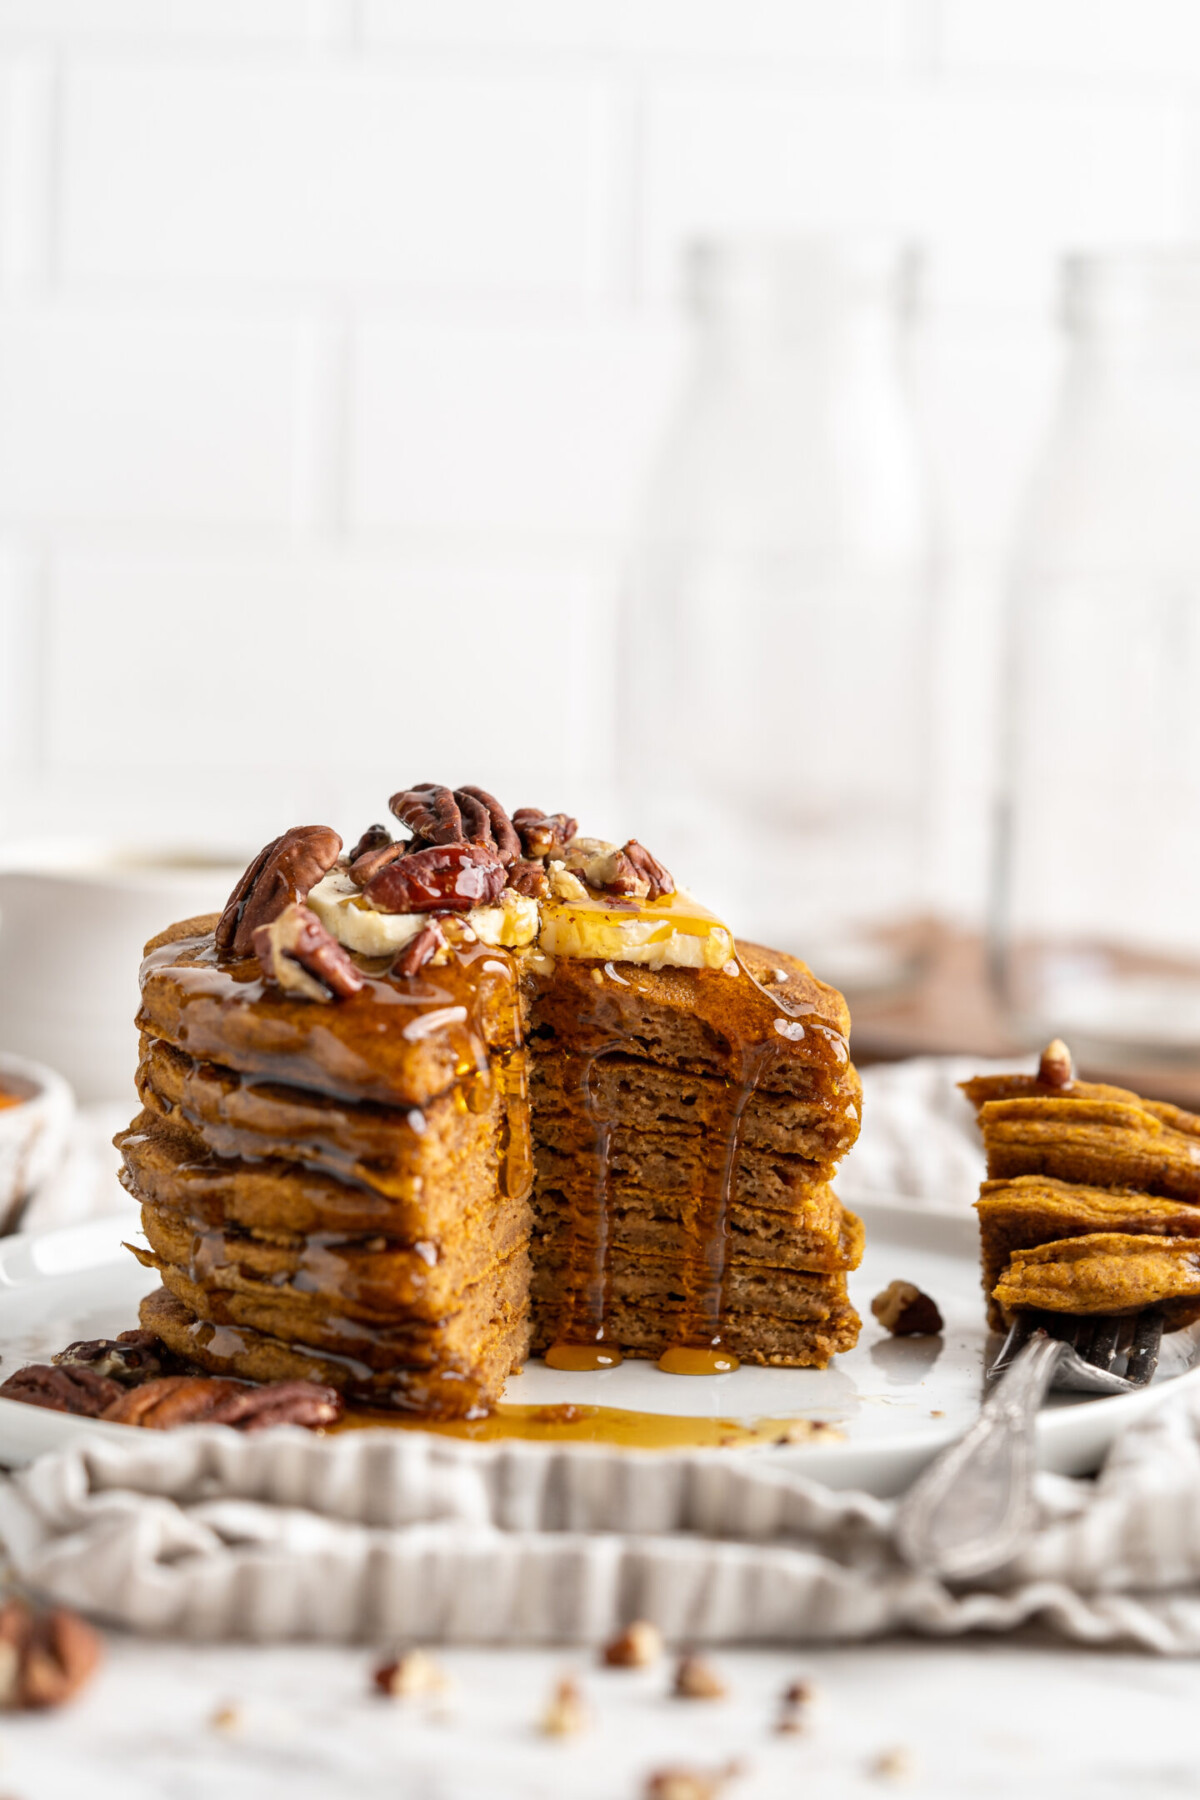 A stack of pumpkin pancakes on a plate, topped with nuts, with a quarter of the stack cut out.